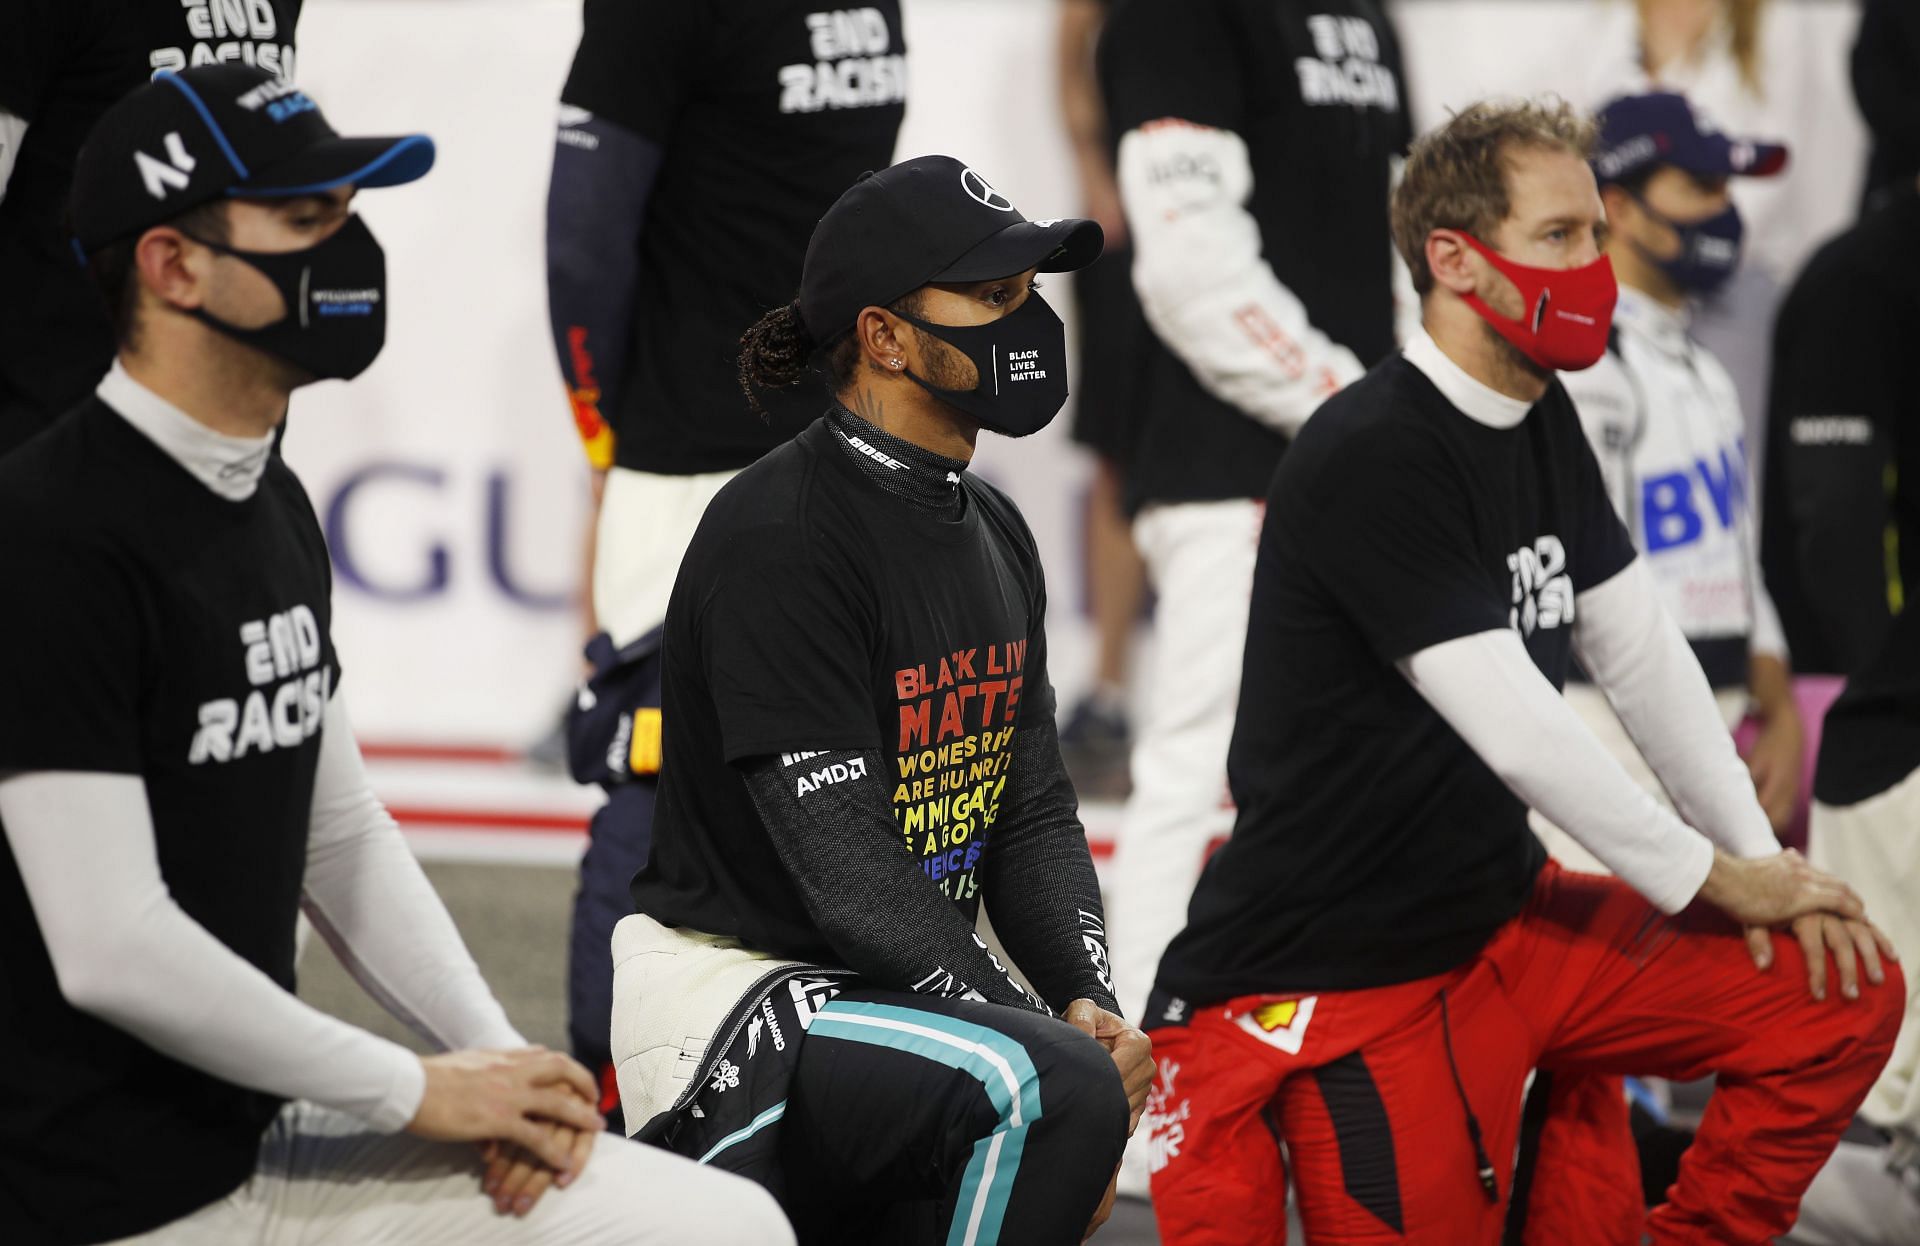 F1 Grand Prix of Bahrain - (L to R) Nicholas Latifi, Lewis Hamilton and Sebastian Vettel take the knee, signifying support to end racism in F1